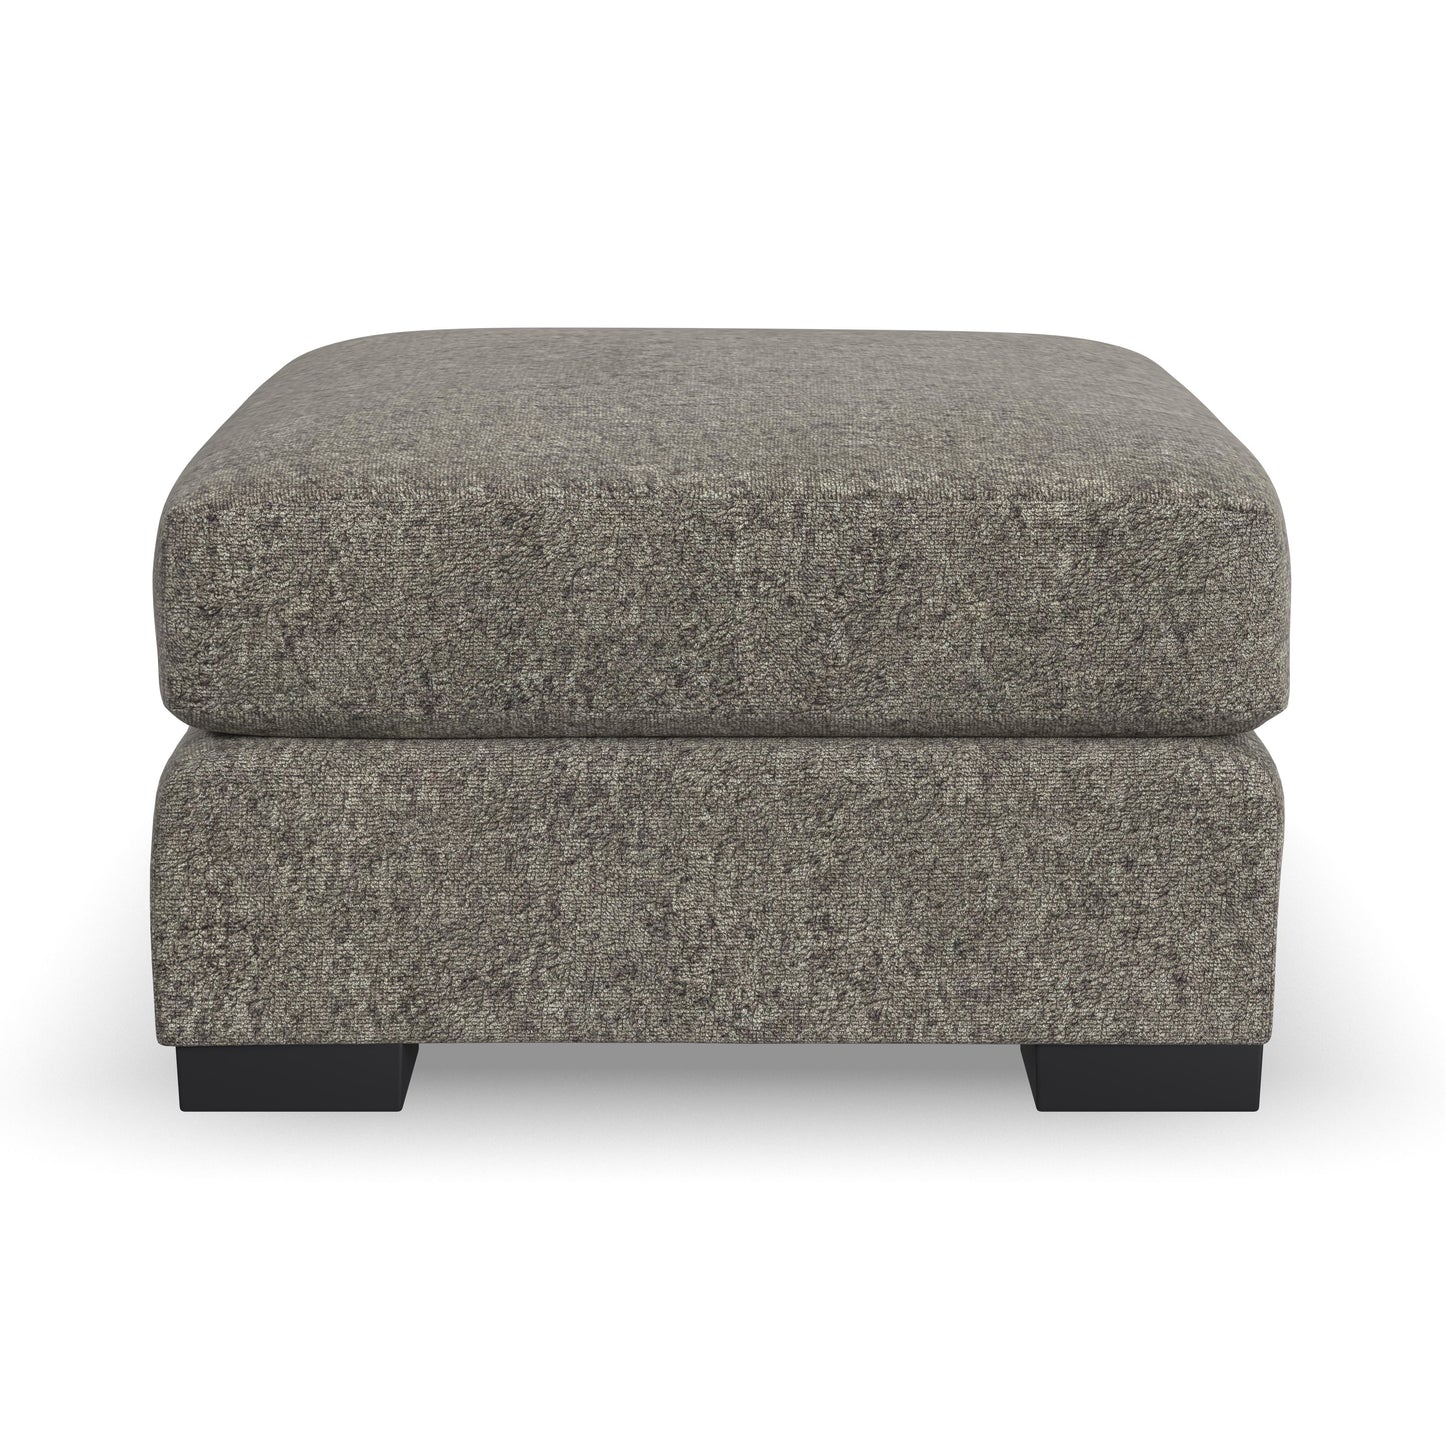 Ottoman in Taupe